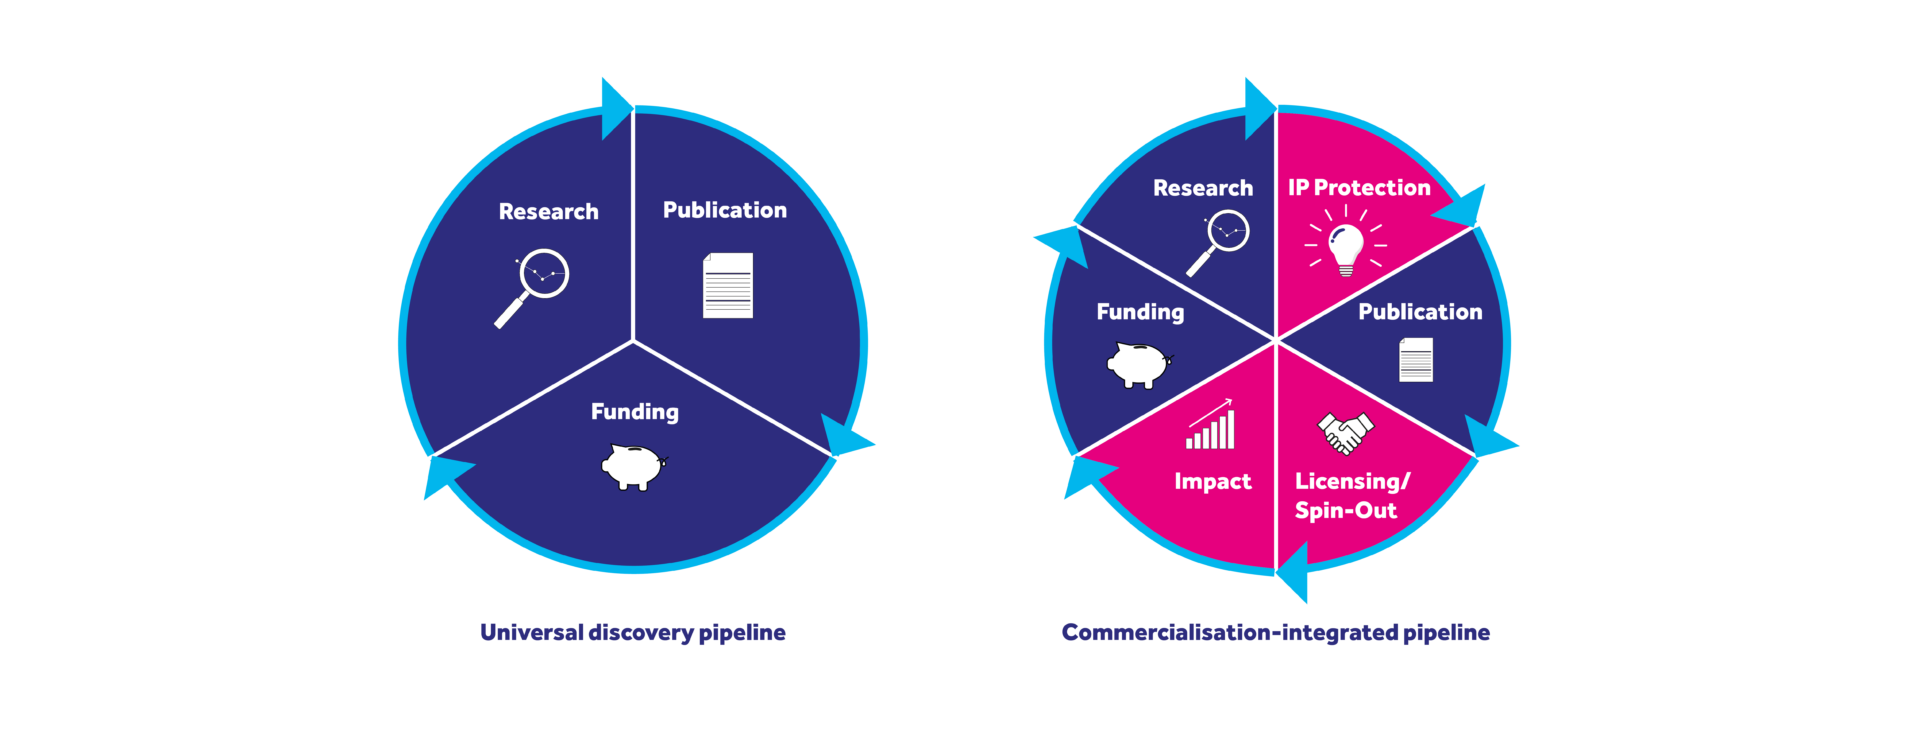 Two graphics showing the cyclical nature of research pipelines. The Left shows the flow of universal research transitioning Funding to Research to Publication. The right graphic shows how commercialisation could integrate with Funding to Research to IP protection to Publication to Licensing or Spinning out to impact and back to funding.